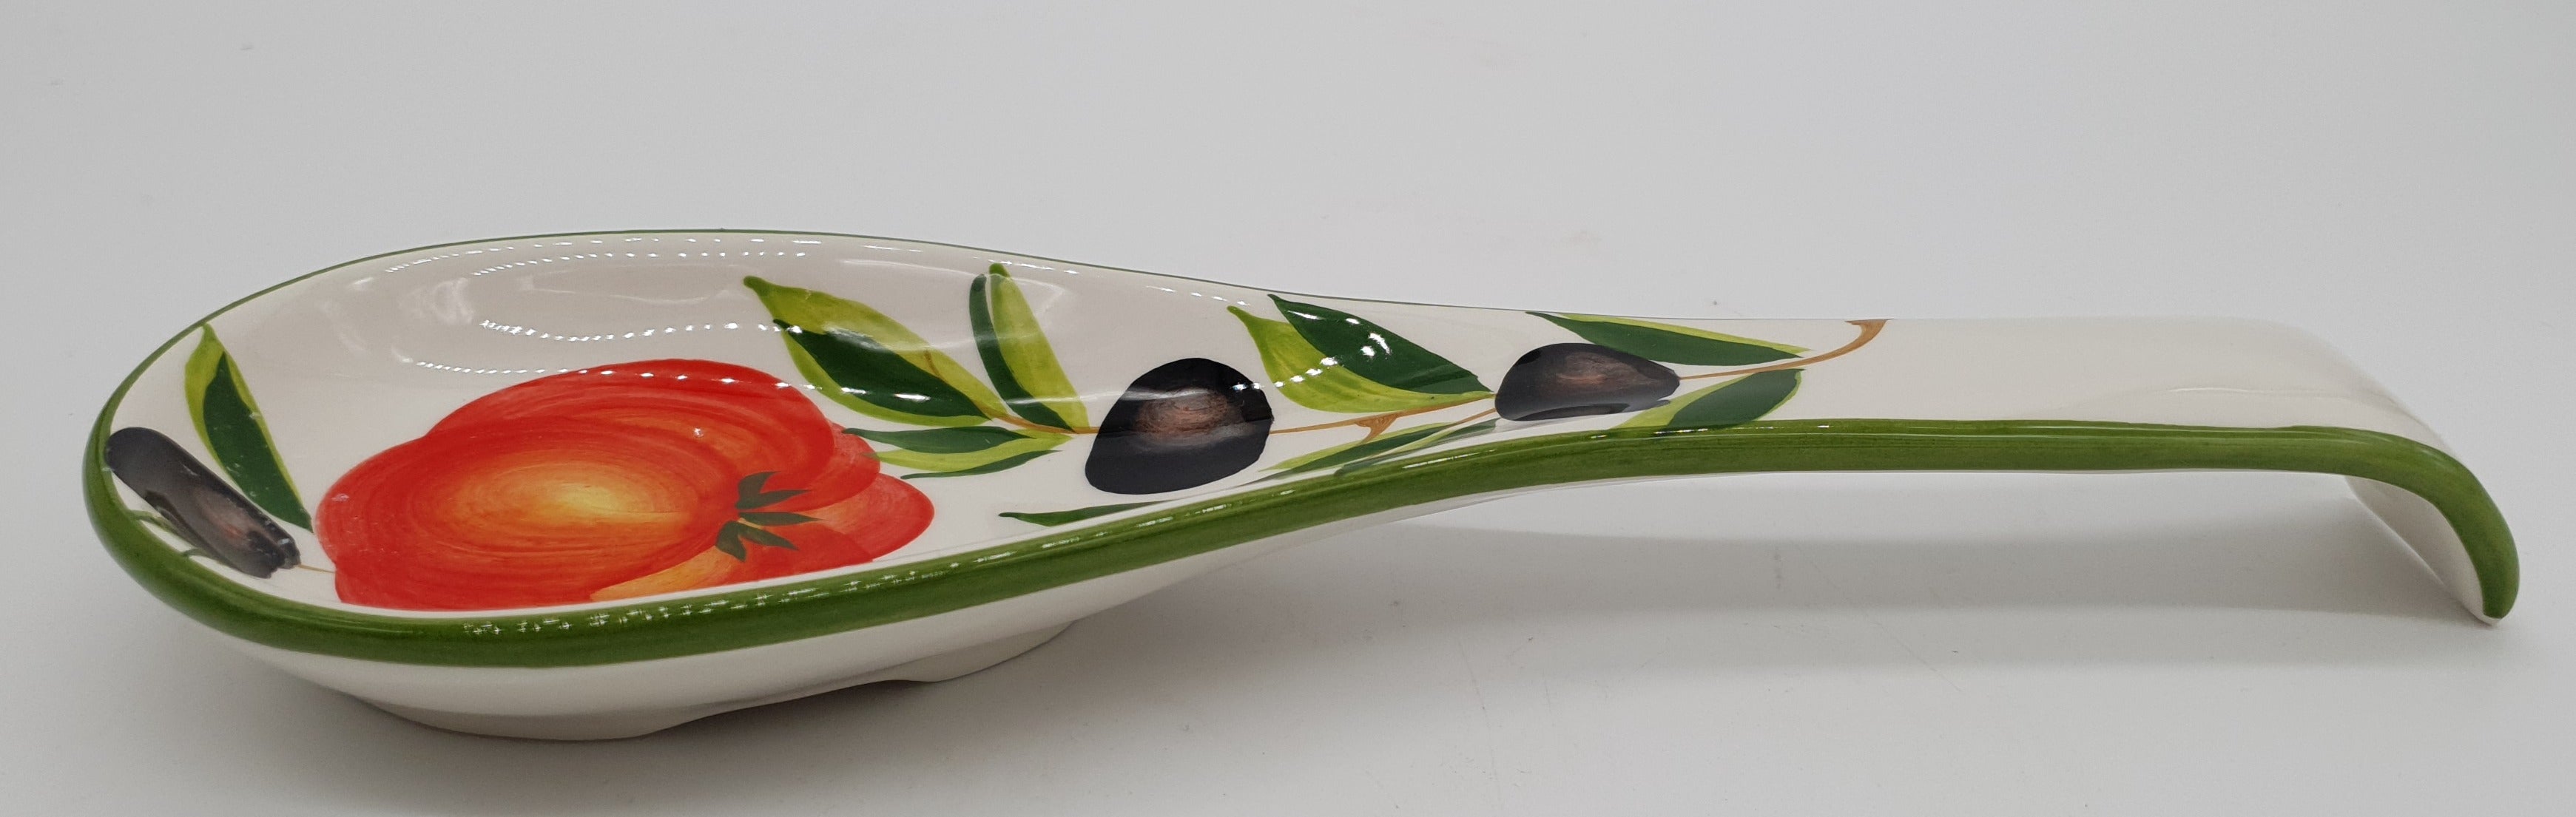 Ladle Or Spoon Holder Tomatoes And Olives Decor